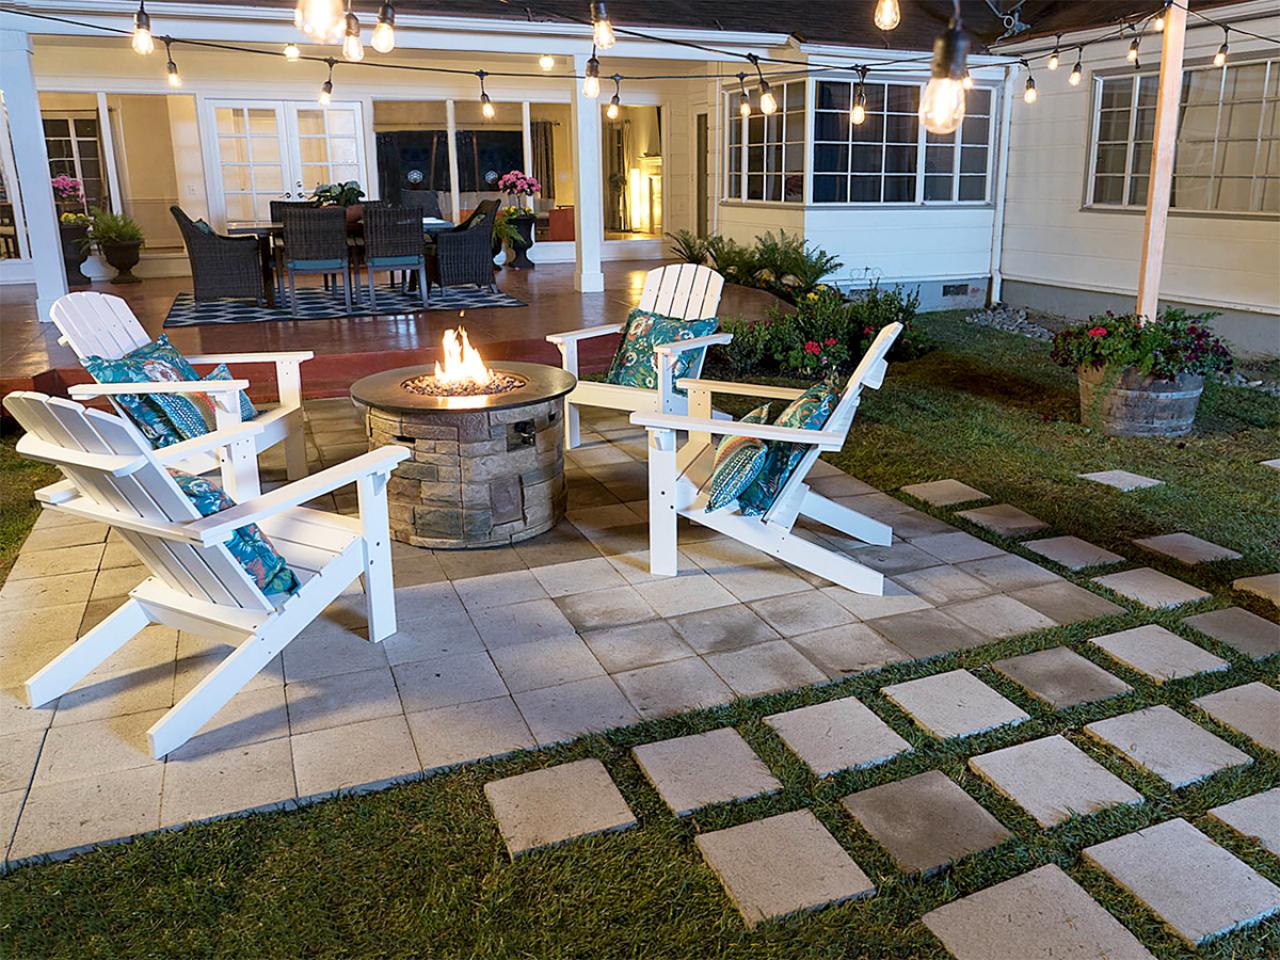 How To Lay A Paver Patio For Firepit, Building A Fire Pit With Pavers